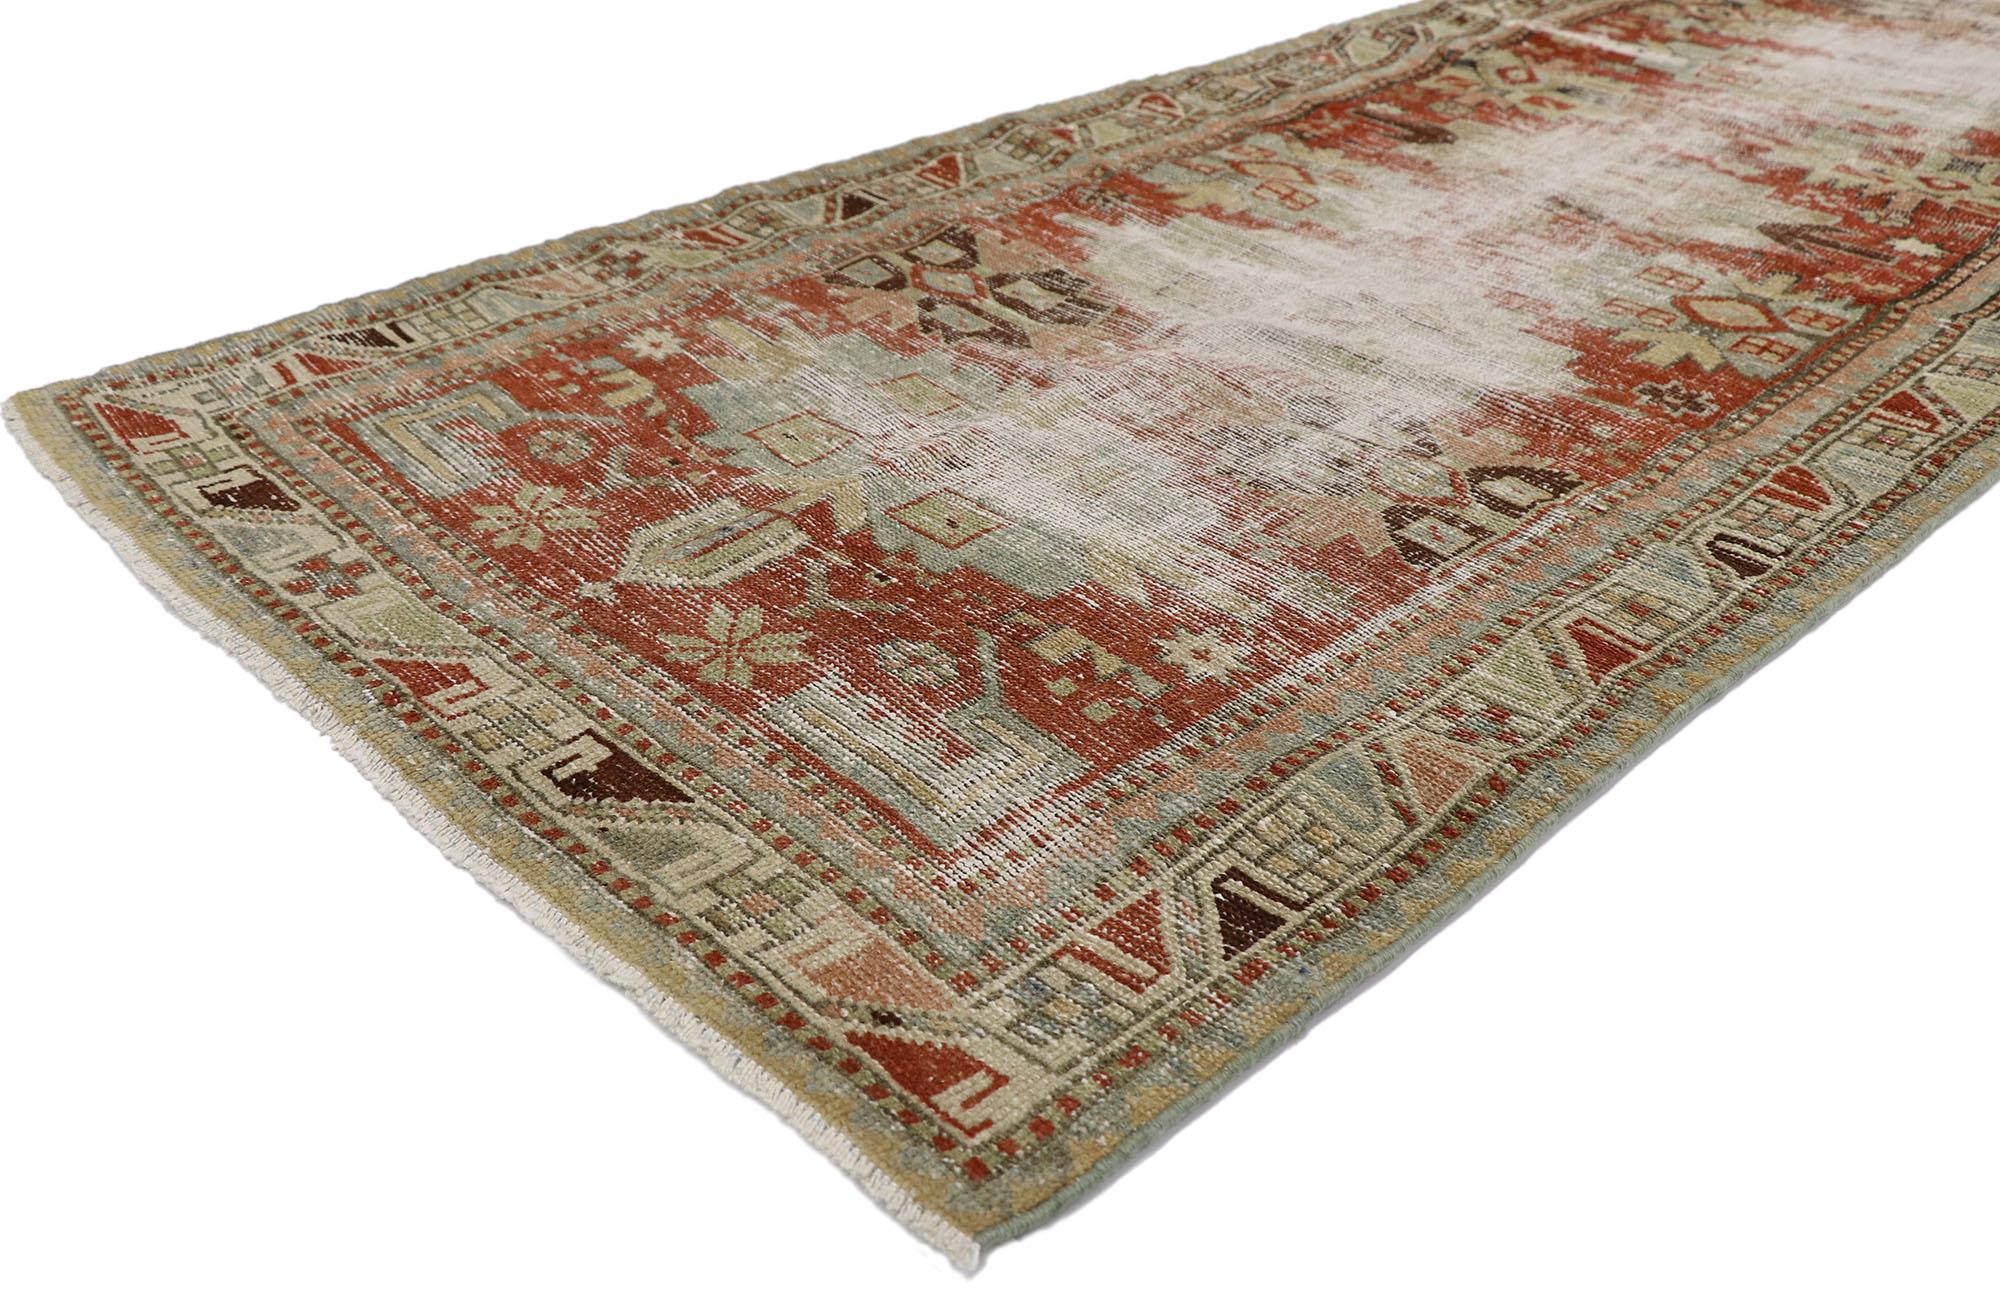 60939 Distressed antique Persian Malayer runner with Modern Rustic style 03'04 x 10'07. Cleverly composed and poised to impress with its rustic sensibility, this hand knotted wool distressed antique Persian Malayer runner will take on a curated